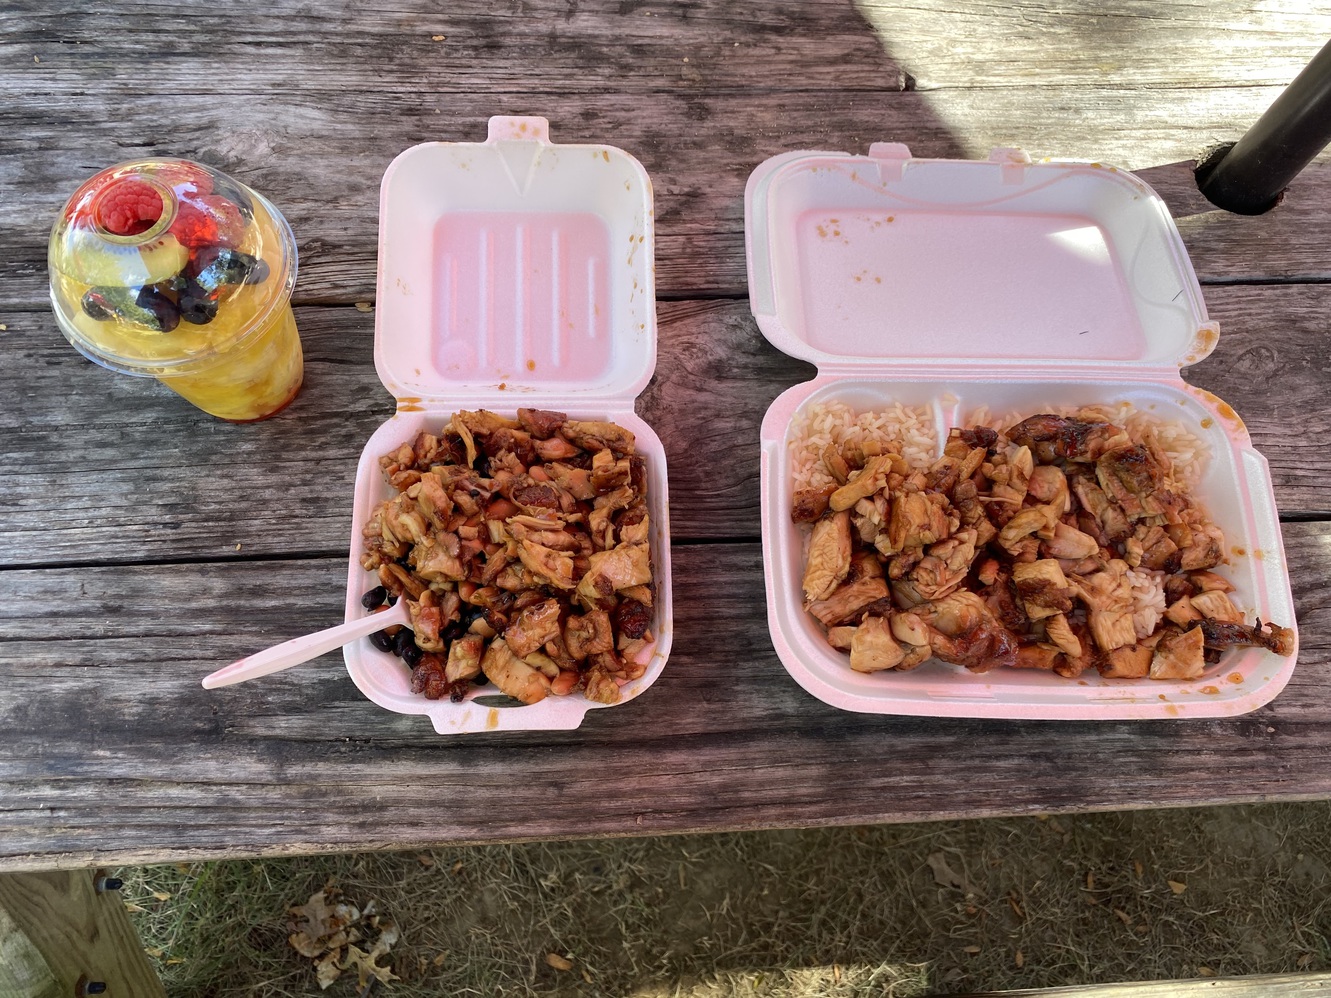 Chicken meals, large and small, plus a fruit cup.